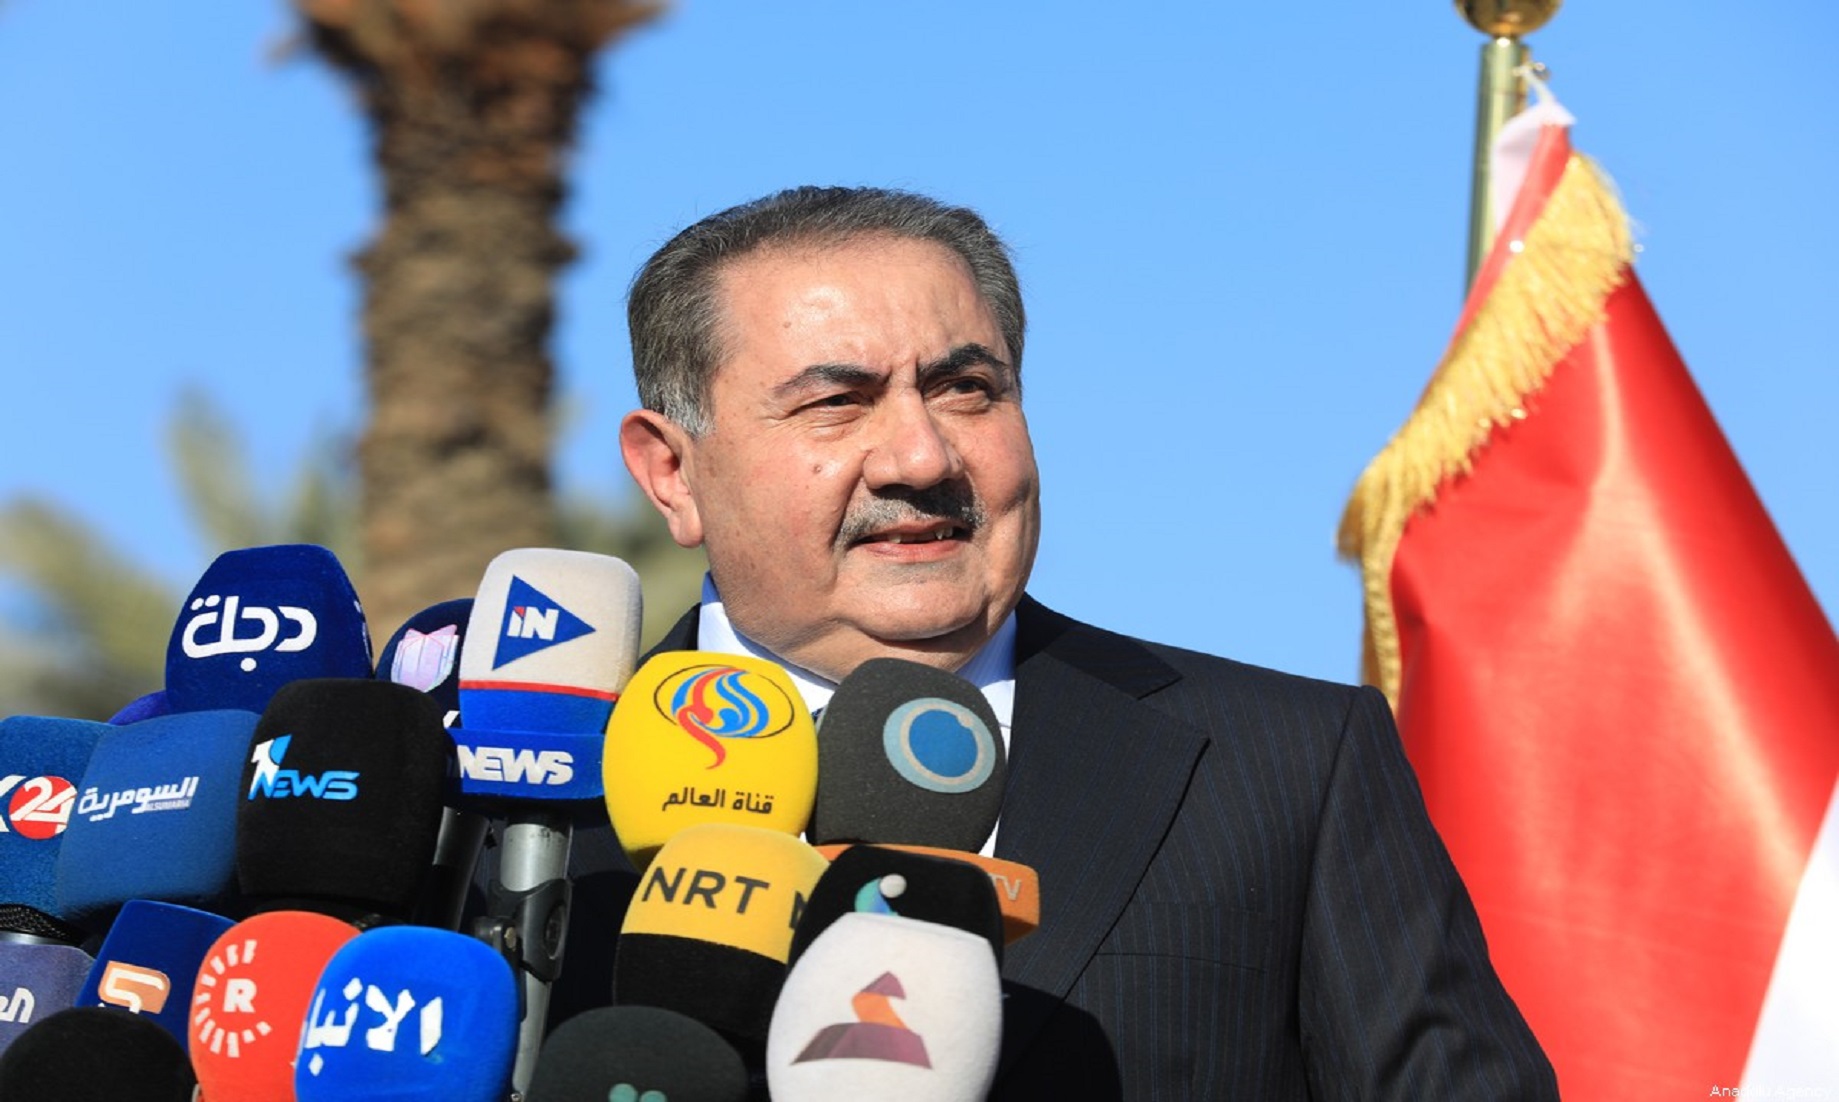 Iraqi Court Excludes Zebari From Running For President